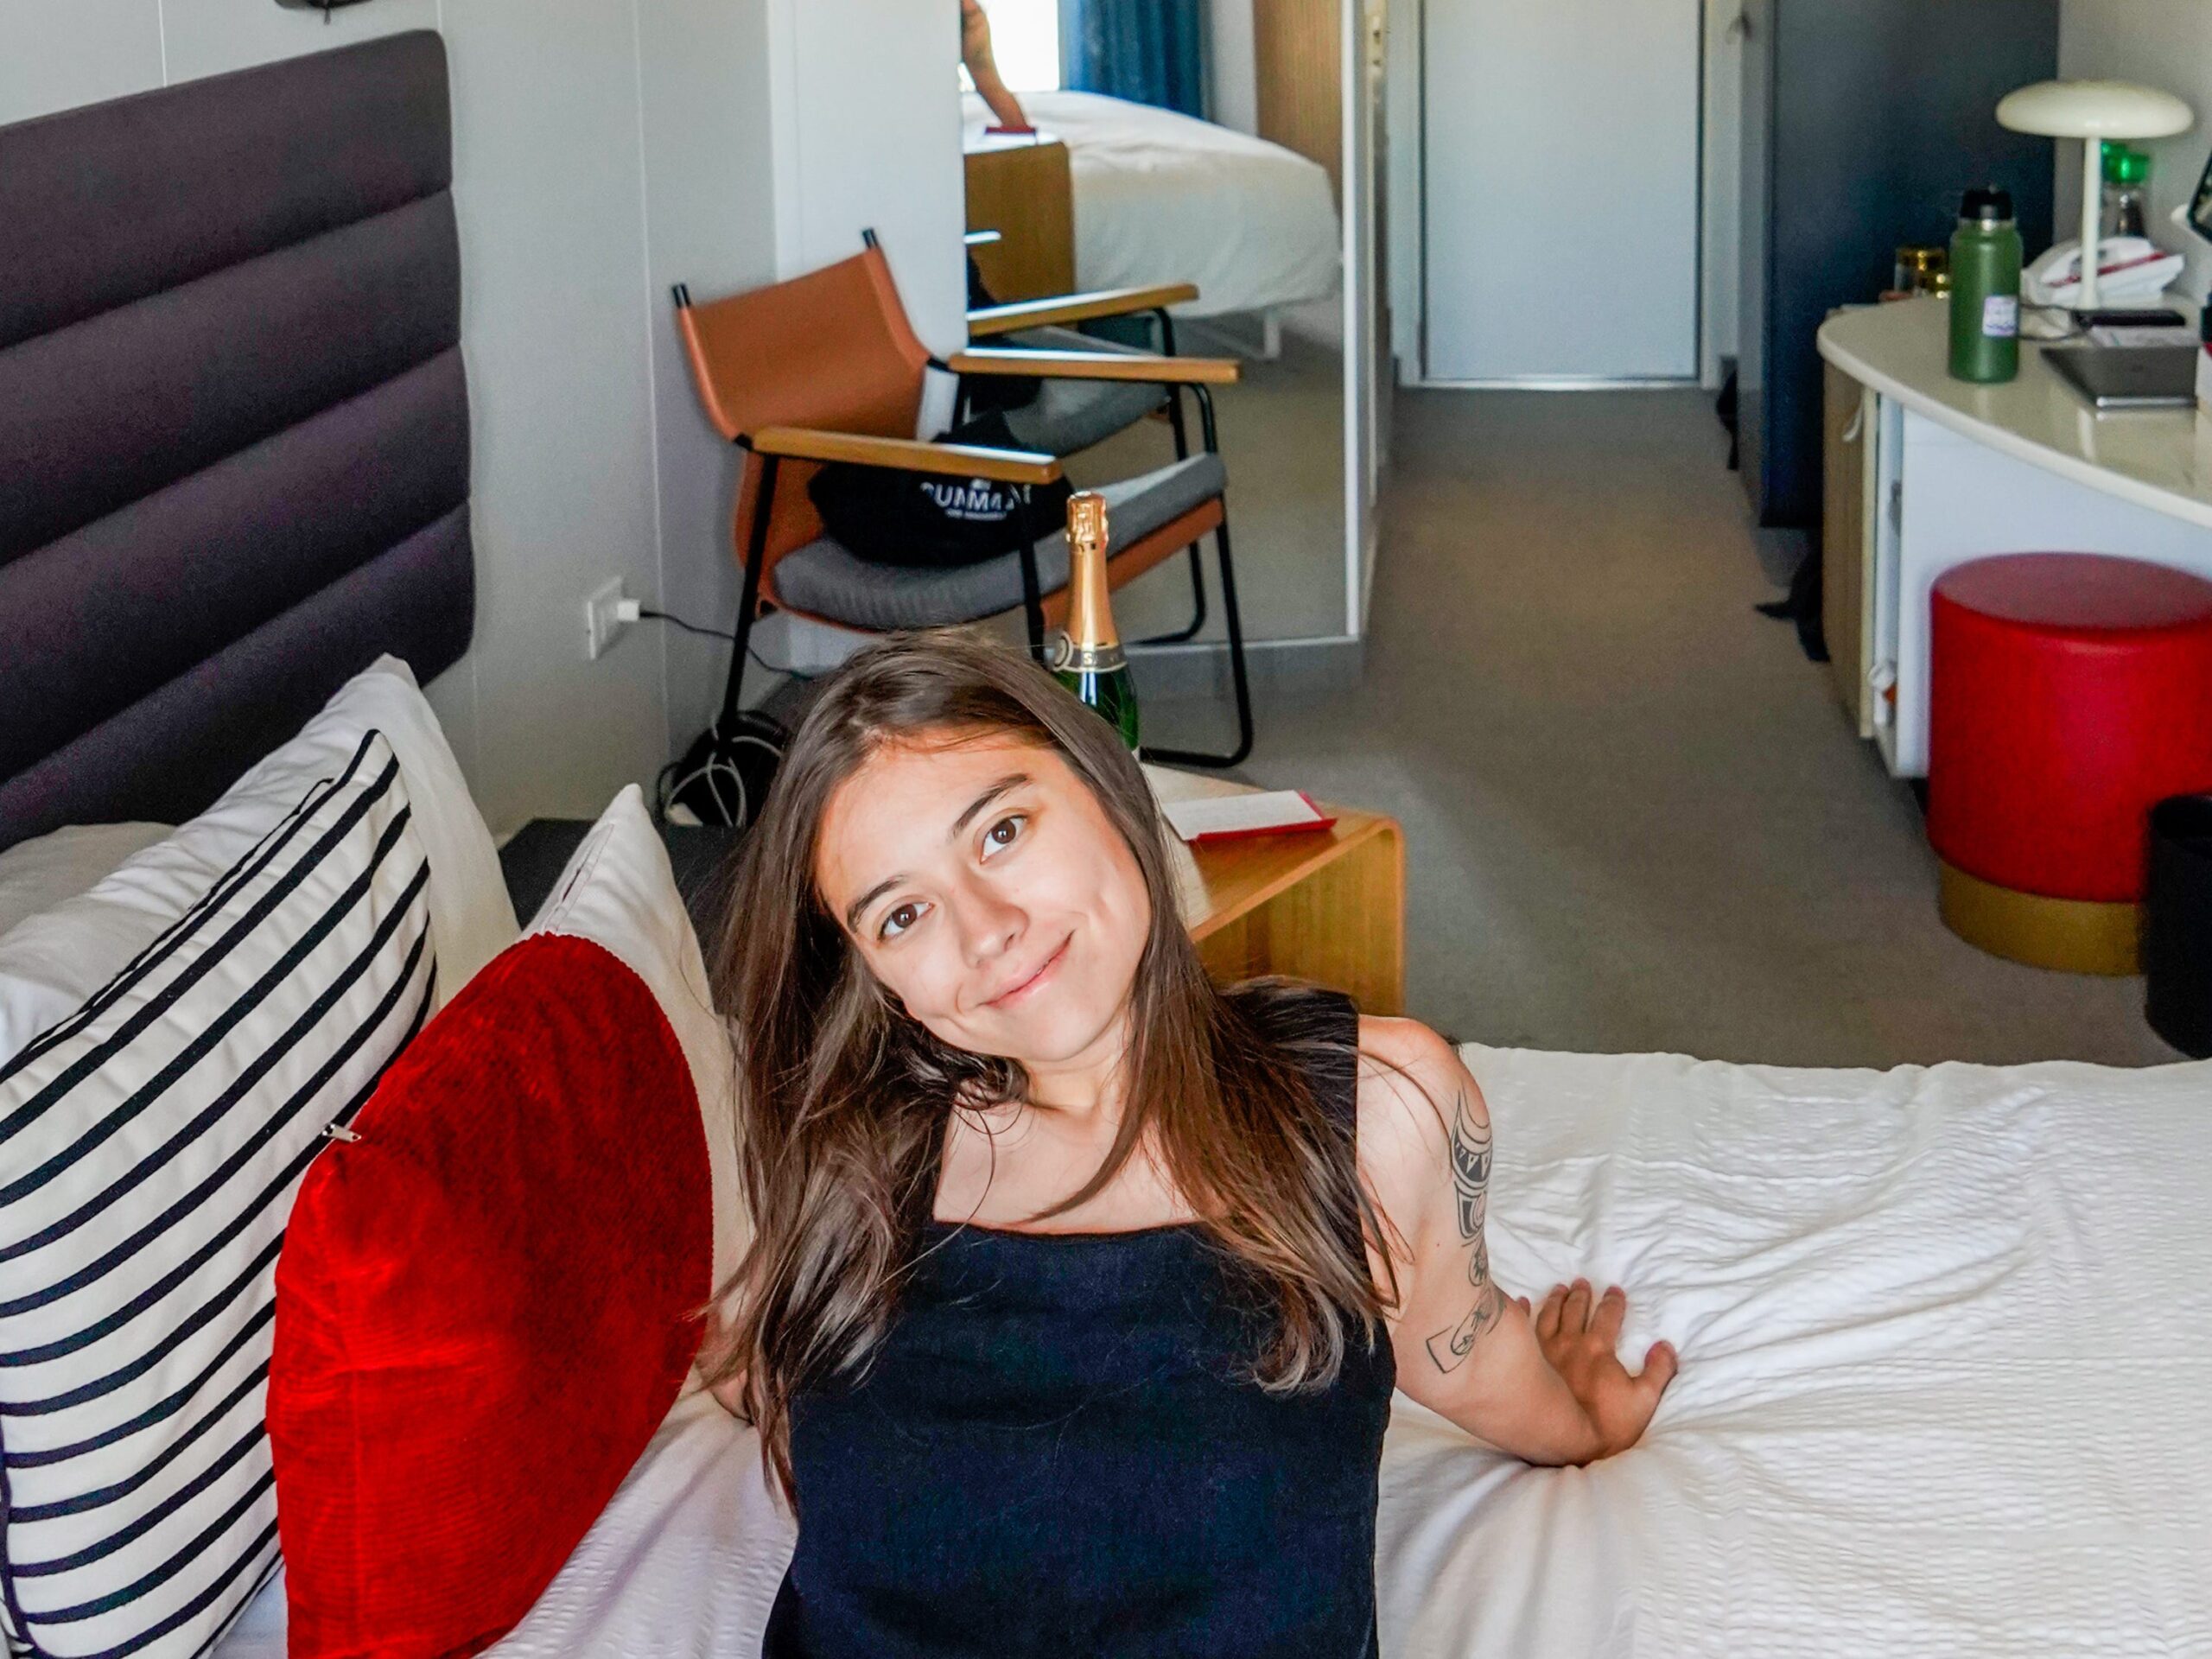 Left: The author in a white tank and sunglasses in front of boats on a dock with a cruise ship in the background. Right: The author sits on a bed with white sheets and a red pillow on the left. Behind her is the cruise ship cabin